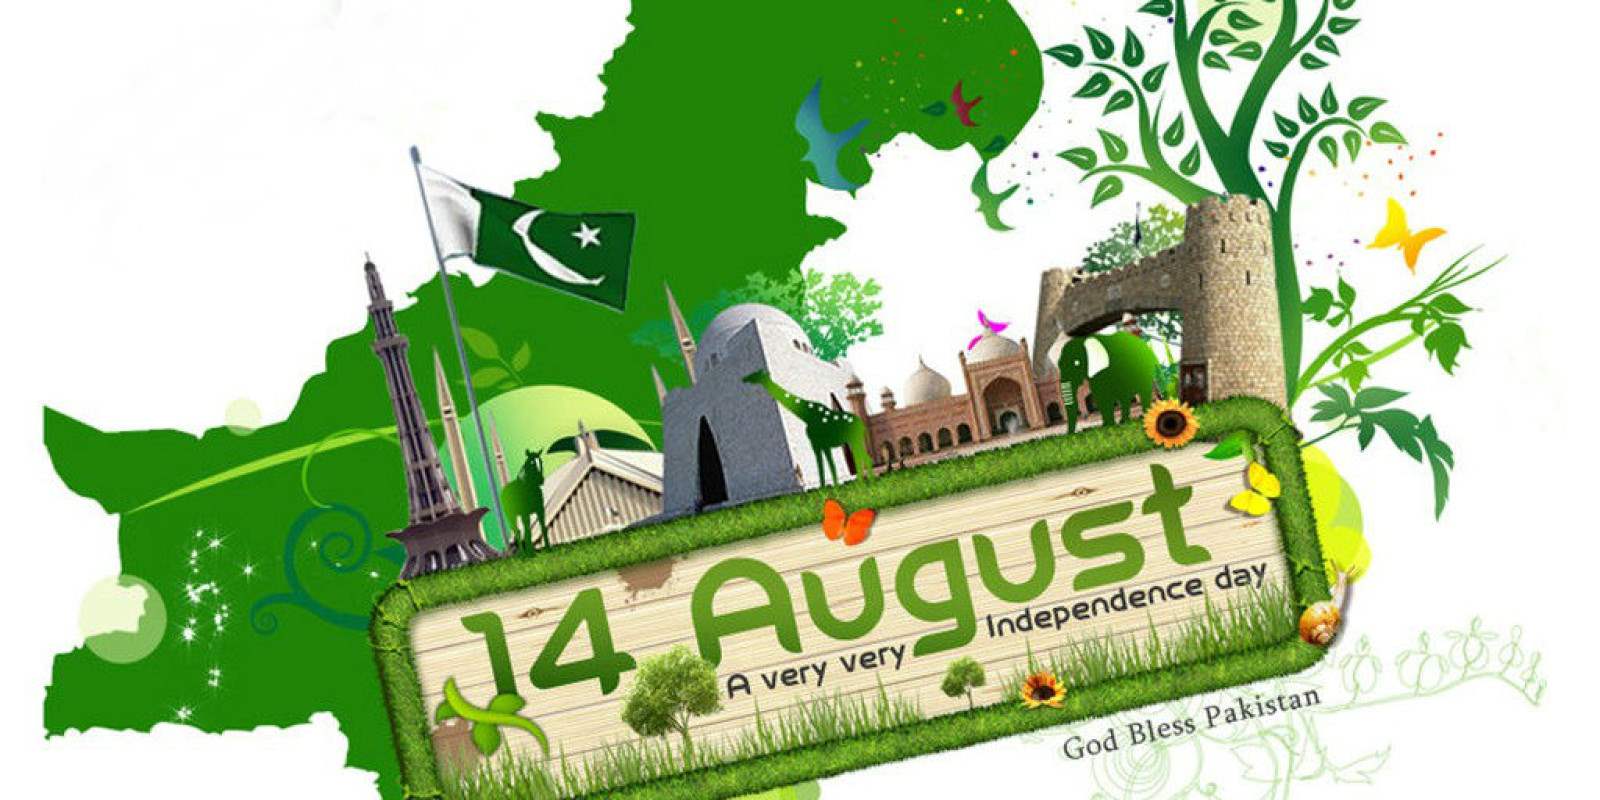 August Independence Day of Pakistan HD Wallpaper